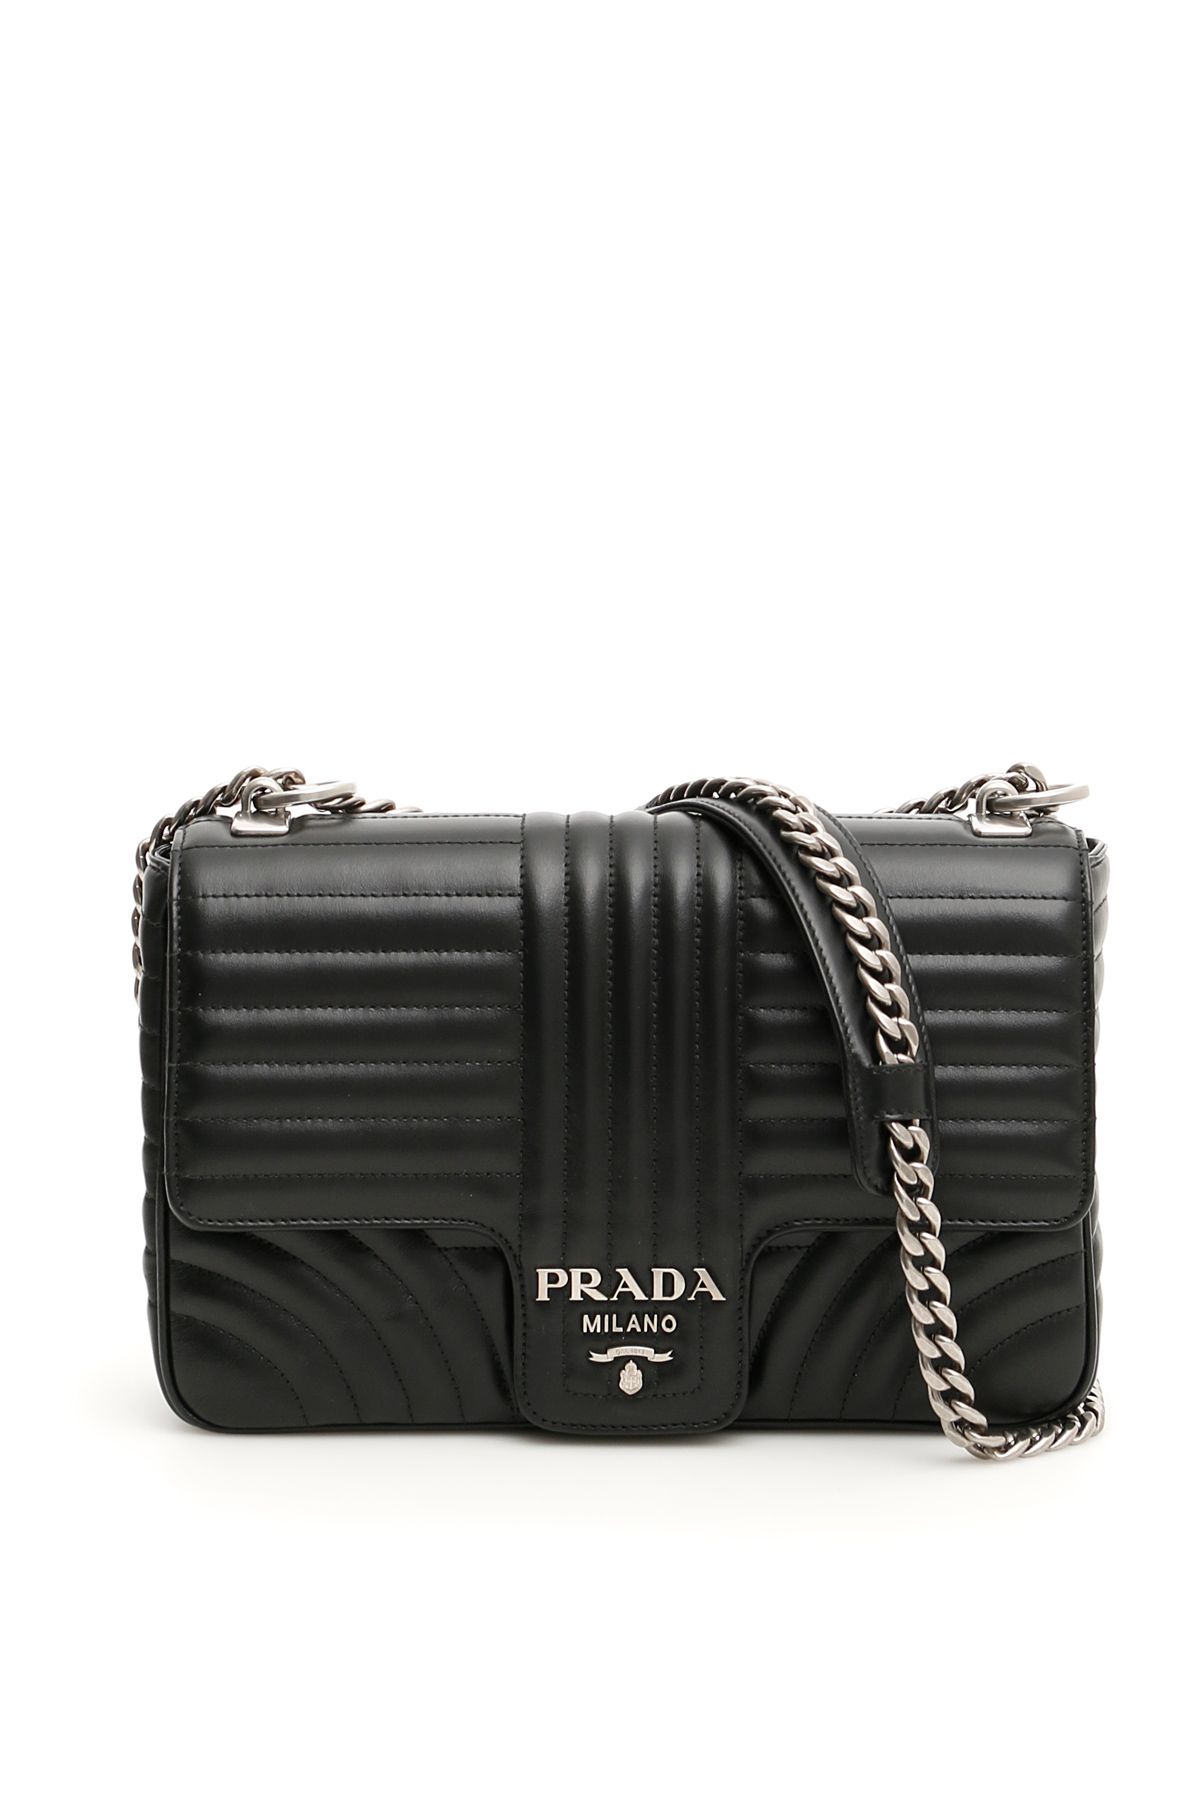 Prada - Leather Diagramme Bag | ABOUT ICONS